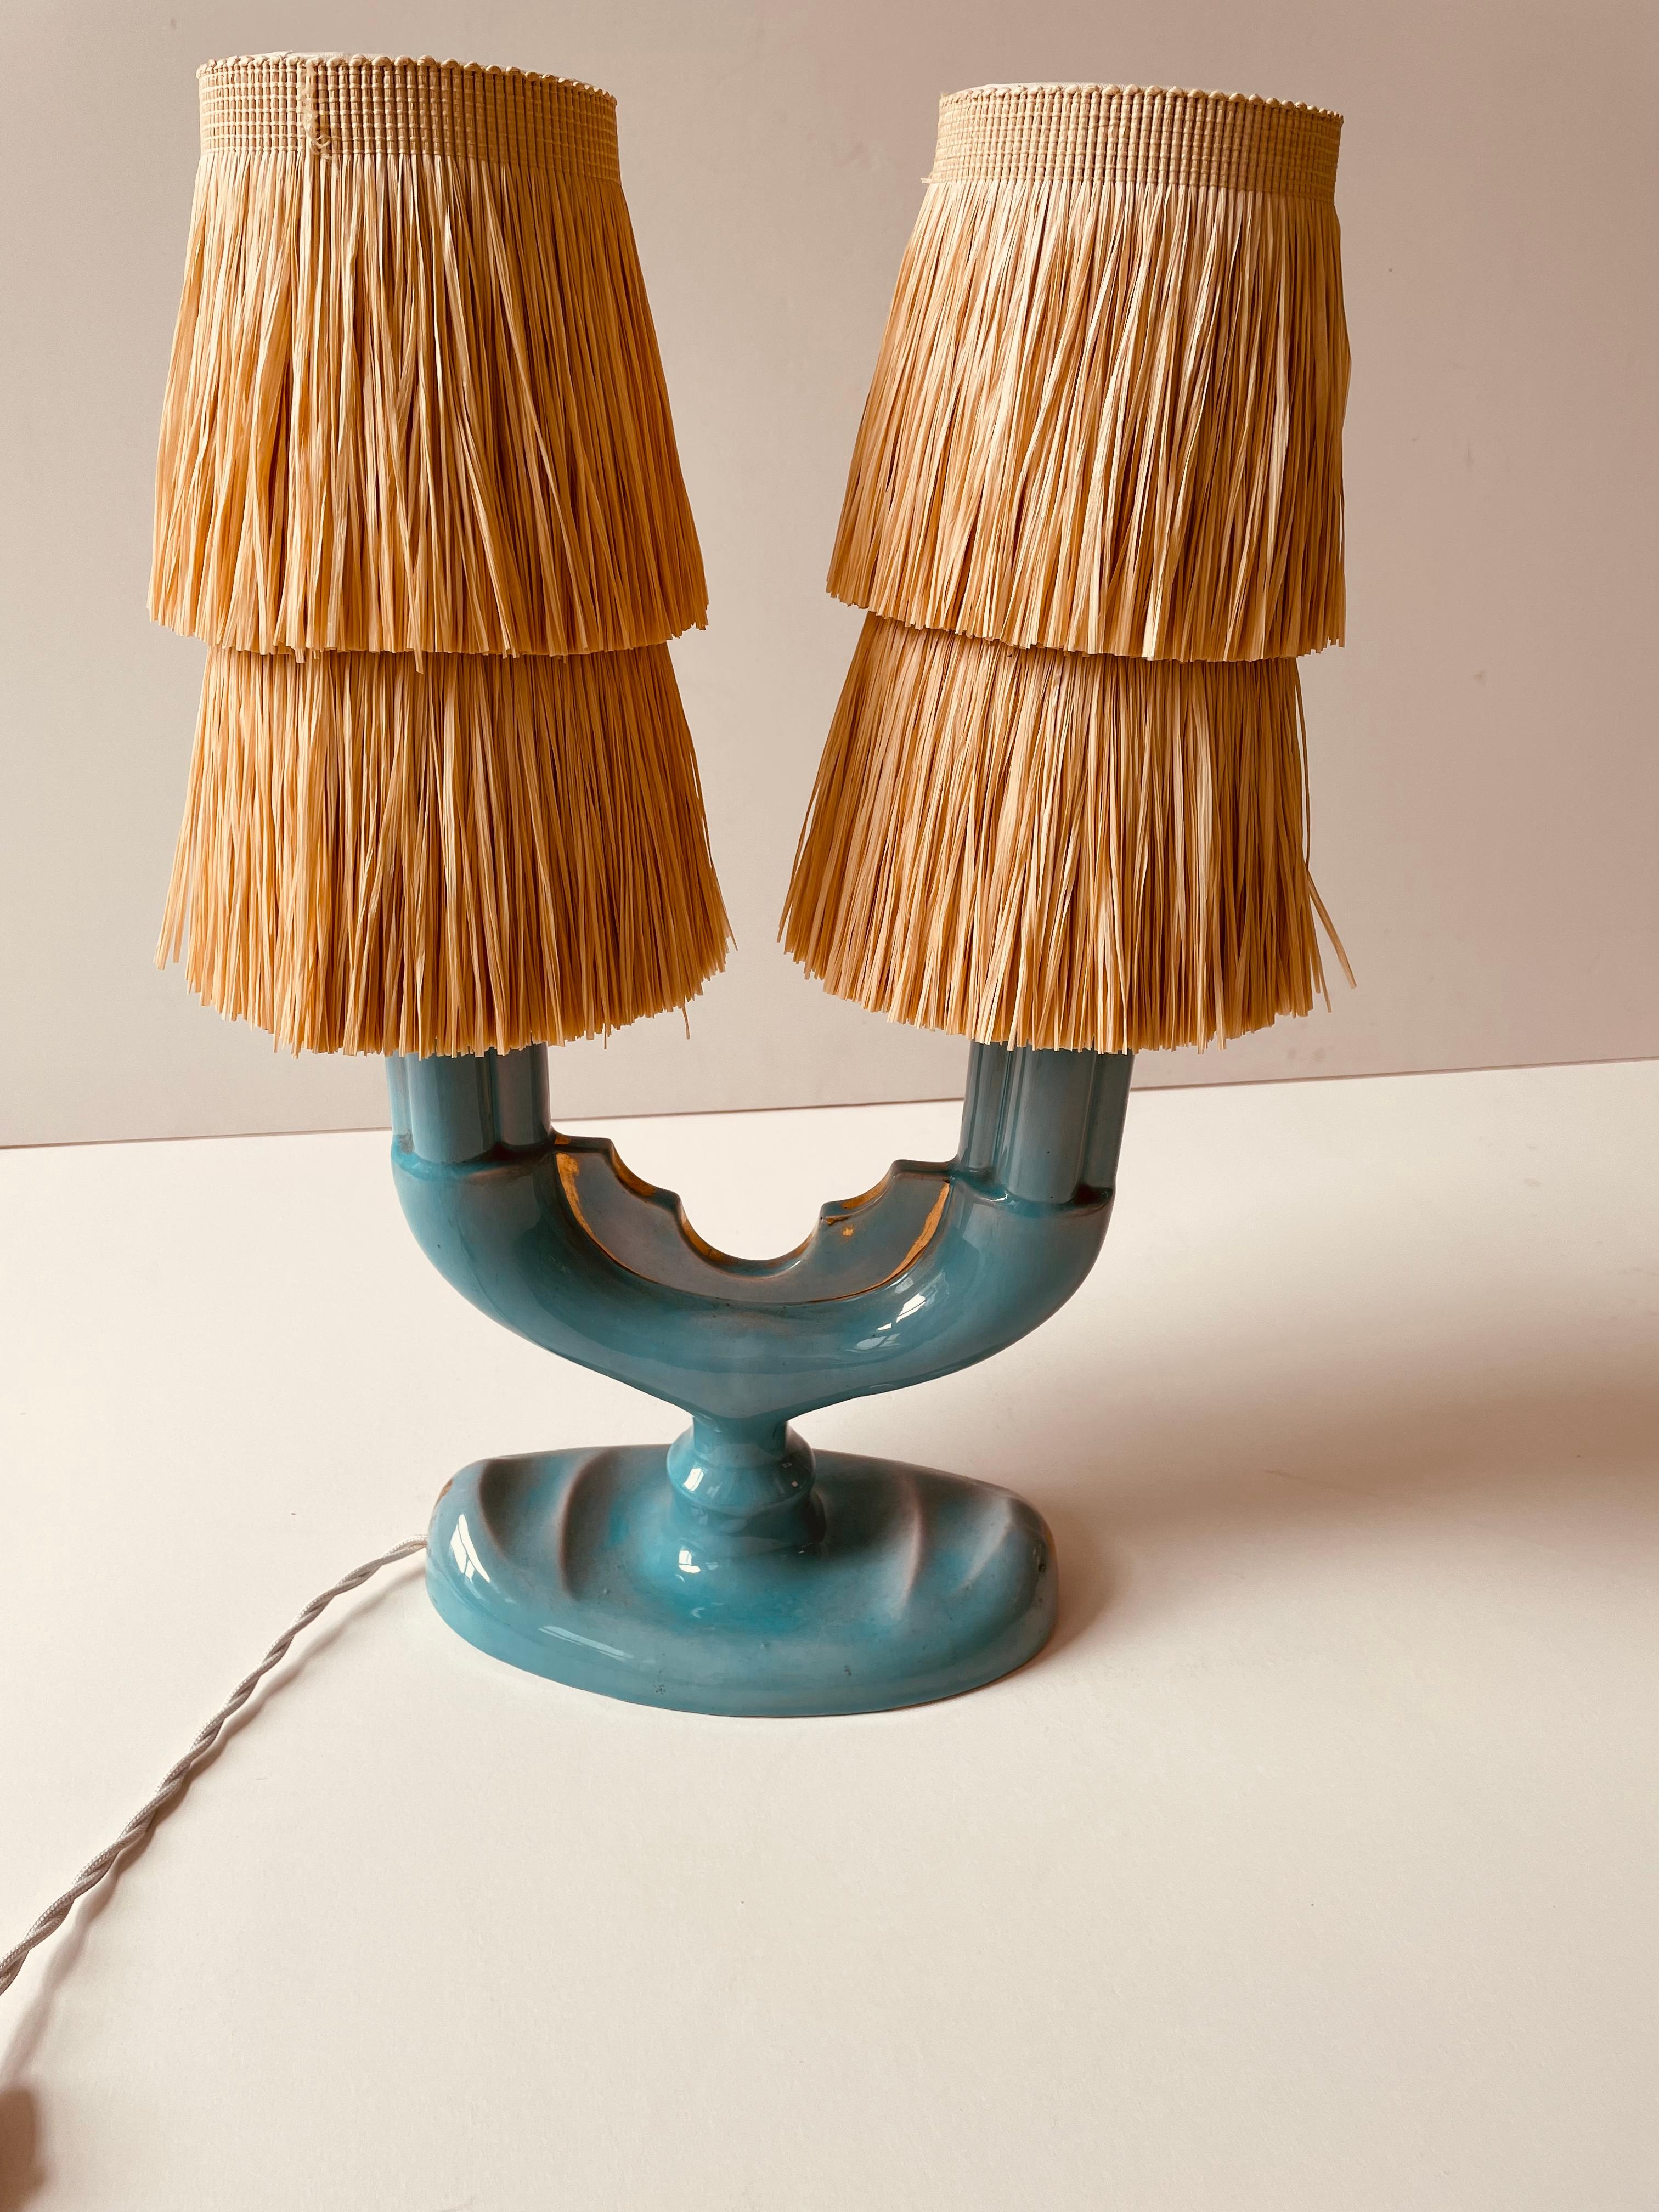 Ceramic Coceram Table Lights  In Turquoise Colour With Raffia Lamp Shades